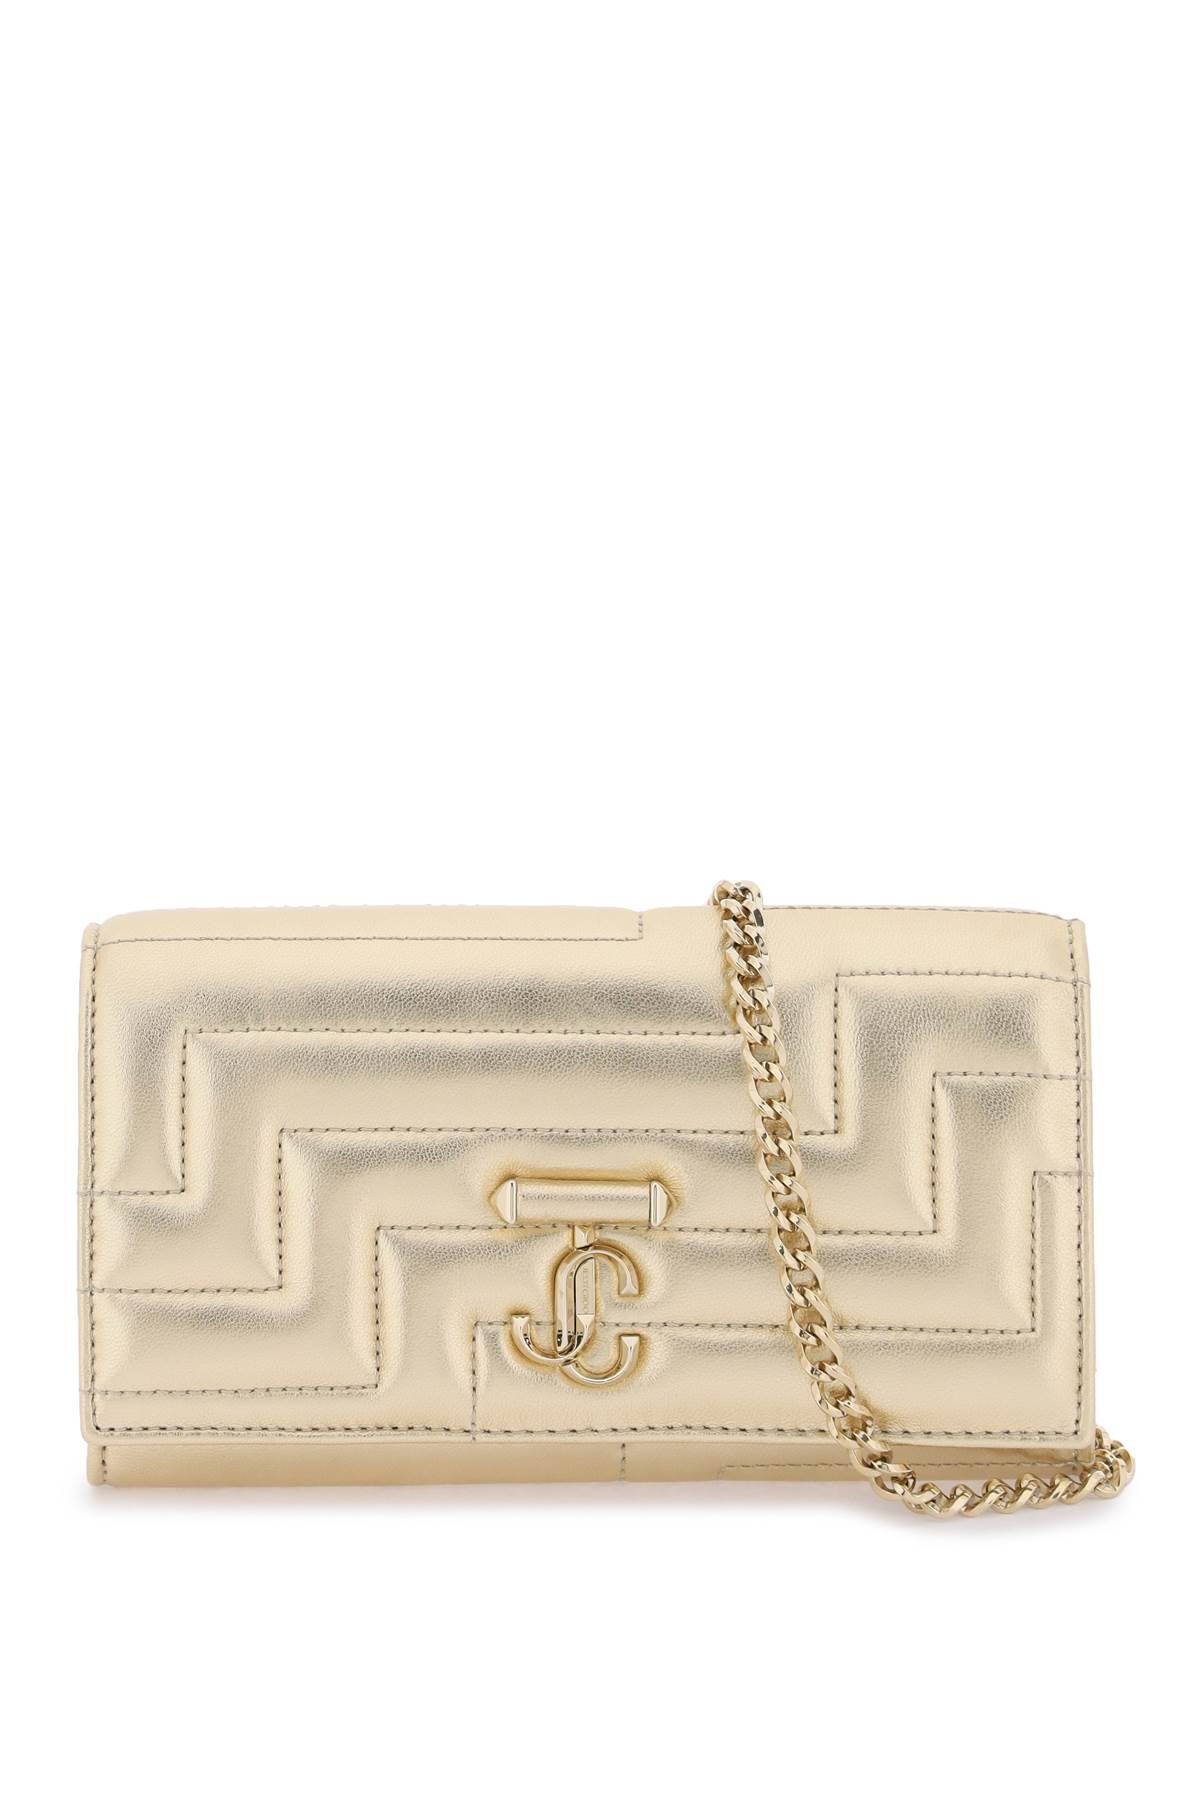 JIMMY CHOO Black Quilted Nappa Leather Mini Crossbody with Gold Monogram - Magnetic Closure & Detachable Chain Strap